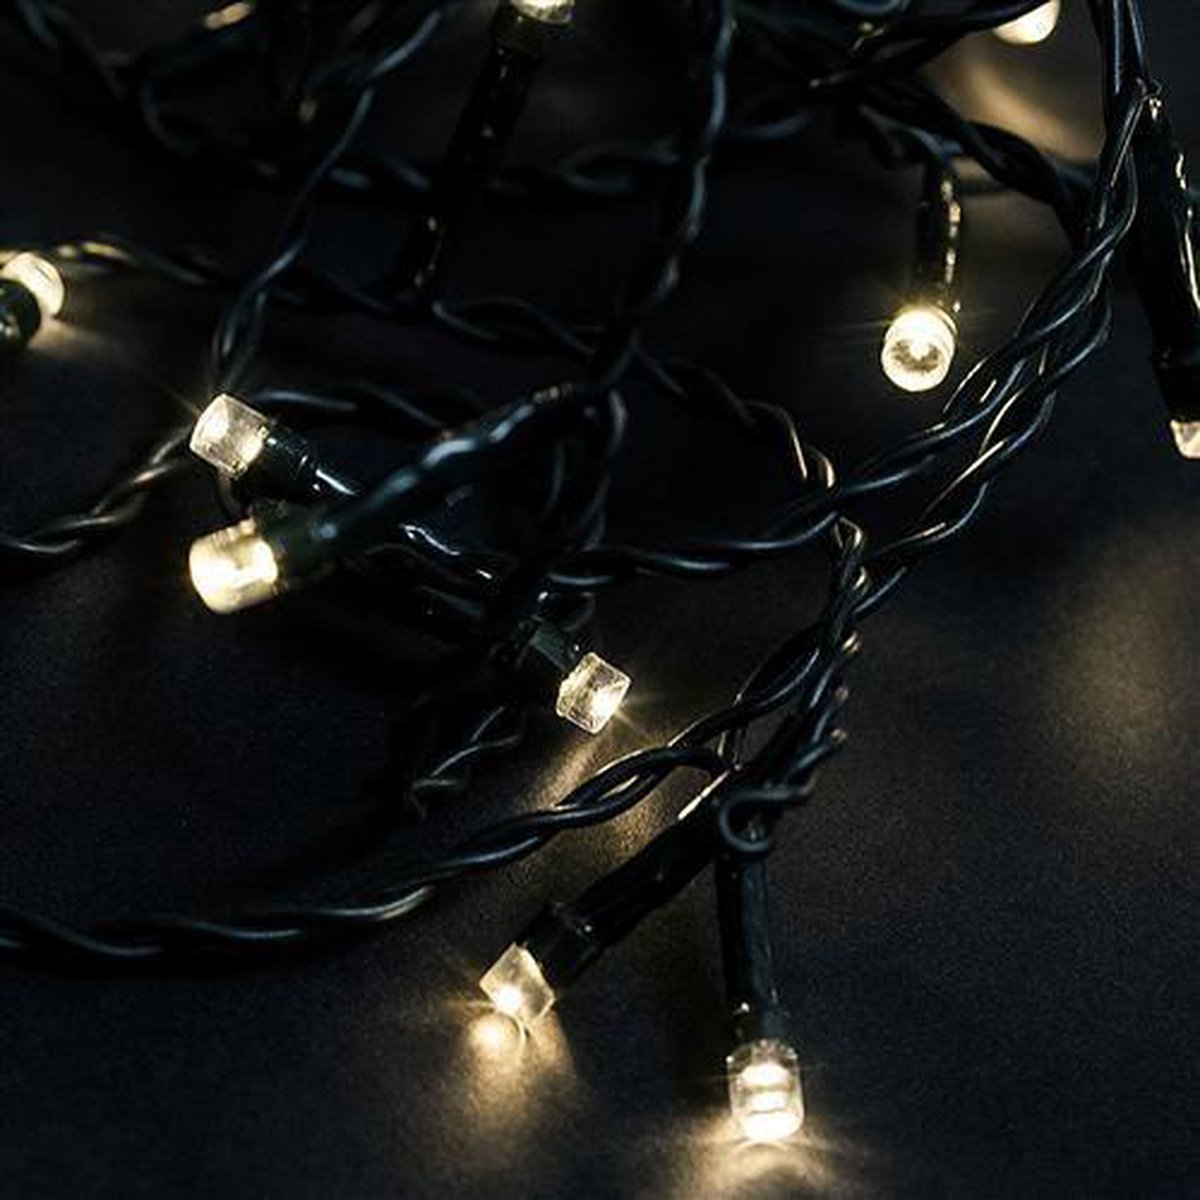 Nampook kerstboomverlichting - 14m - 700led - ww